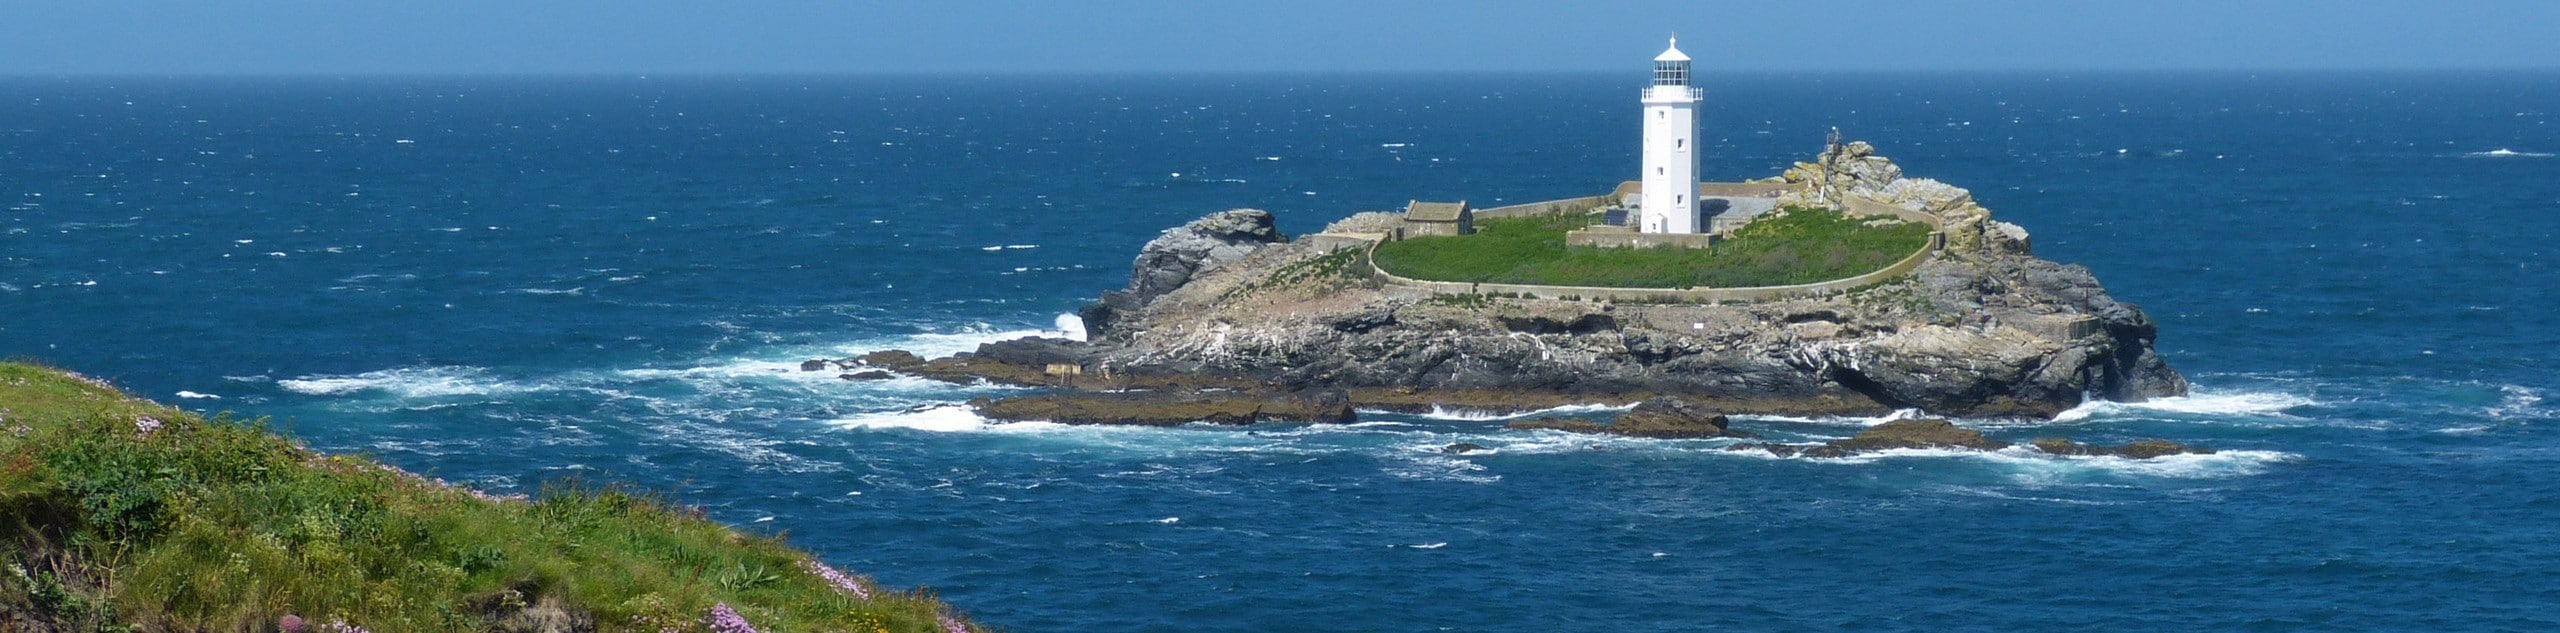 Godrevy Lighthouse and Mutton Cove Walk